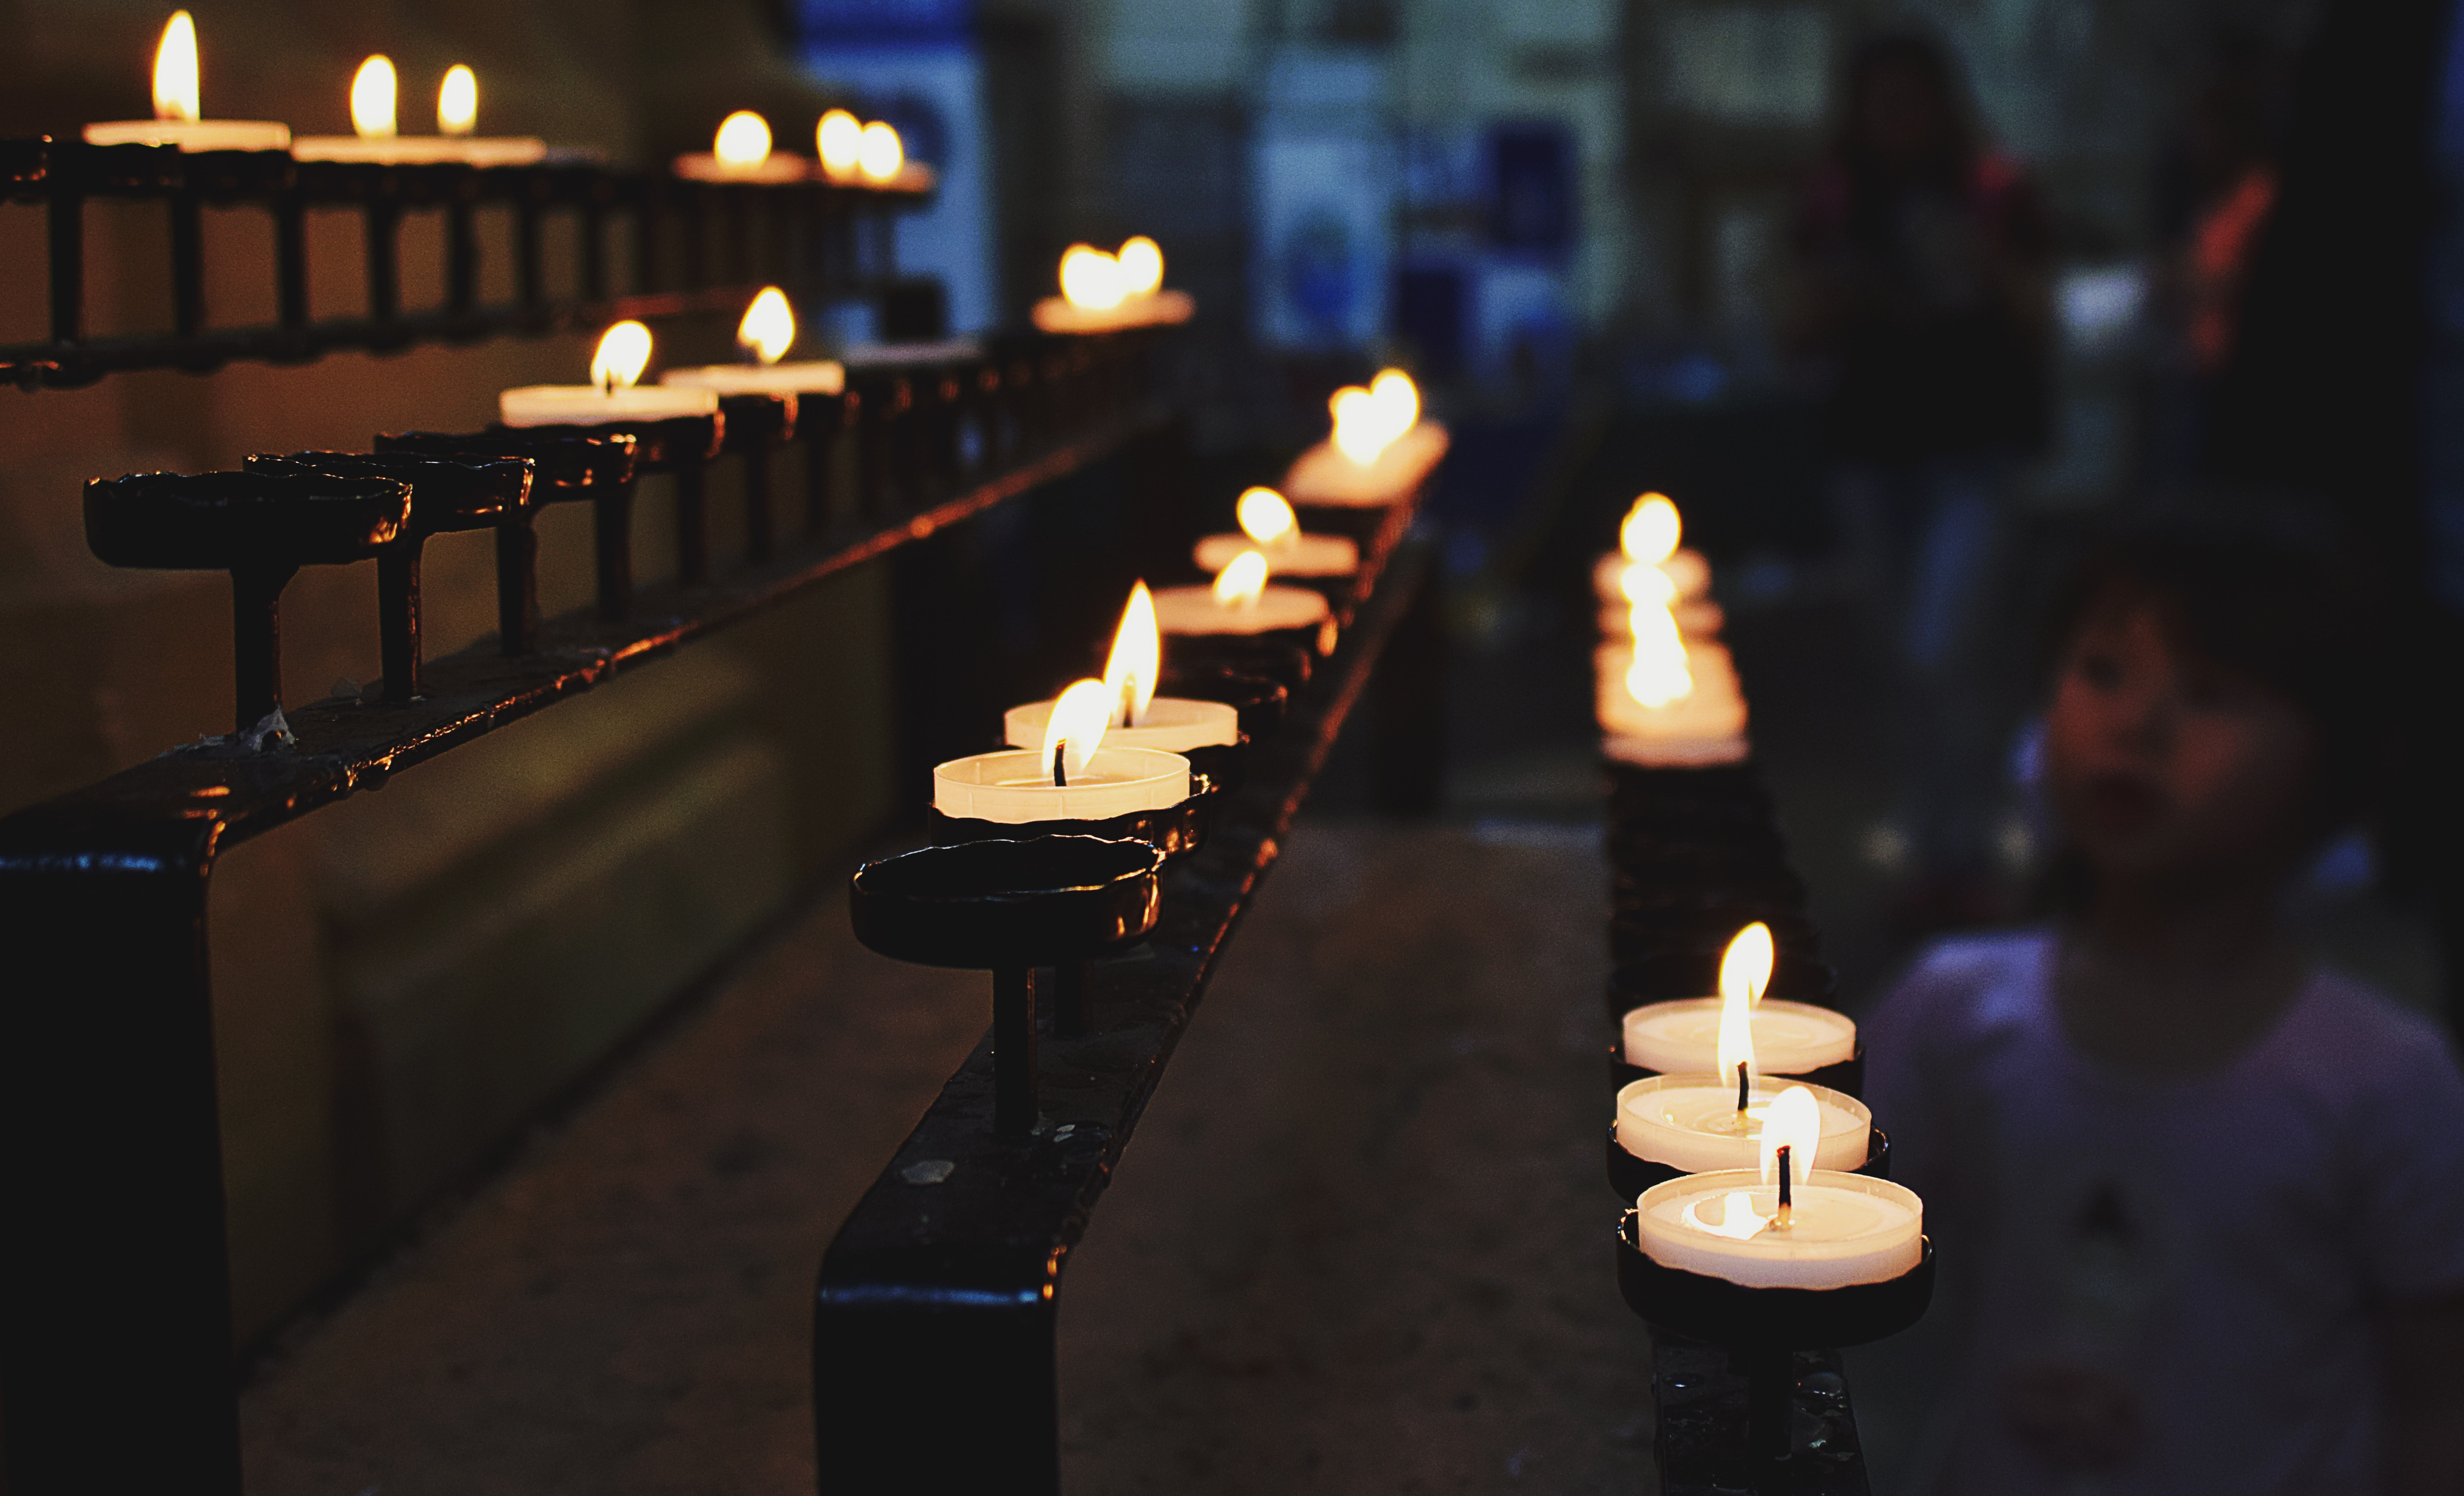 White tealight candles lit during nighttime photo